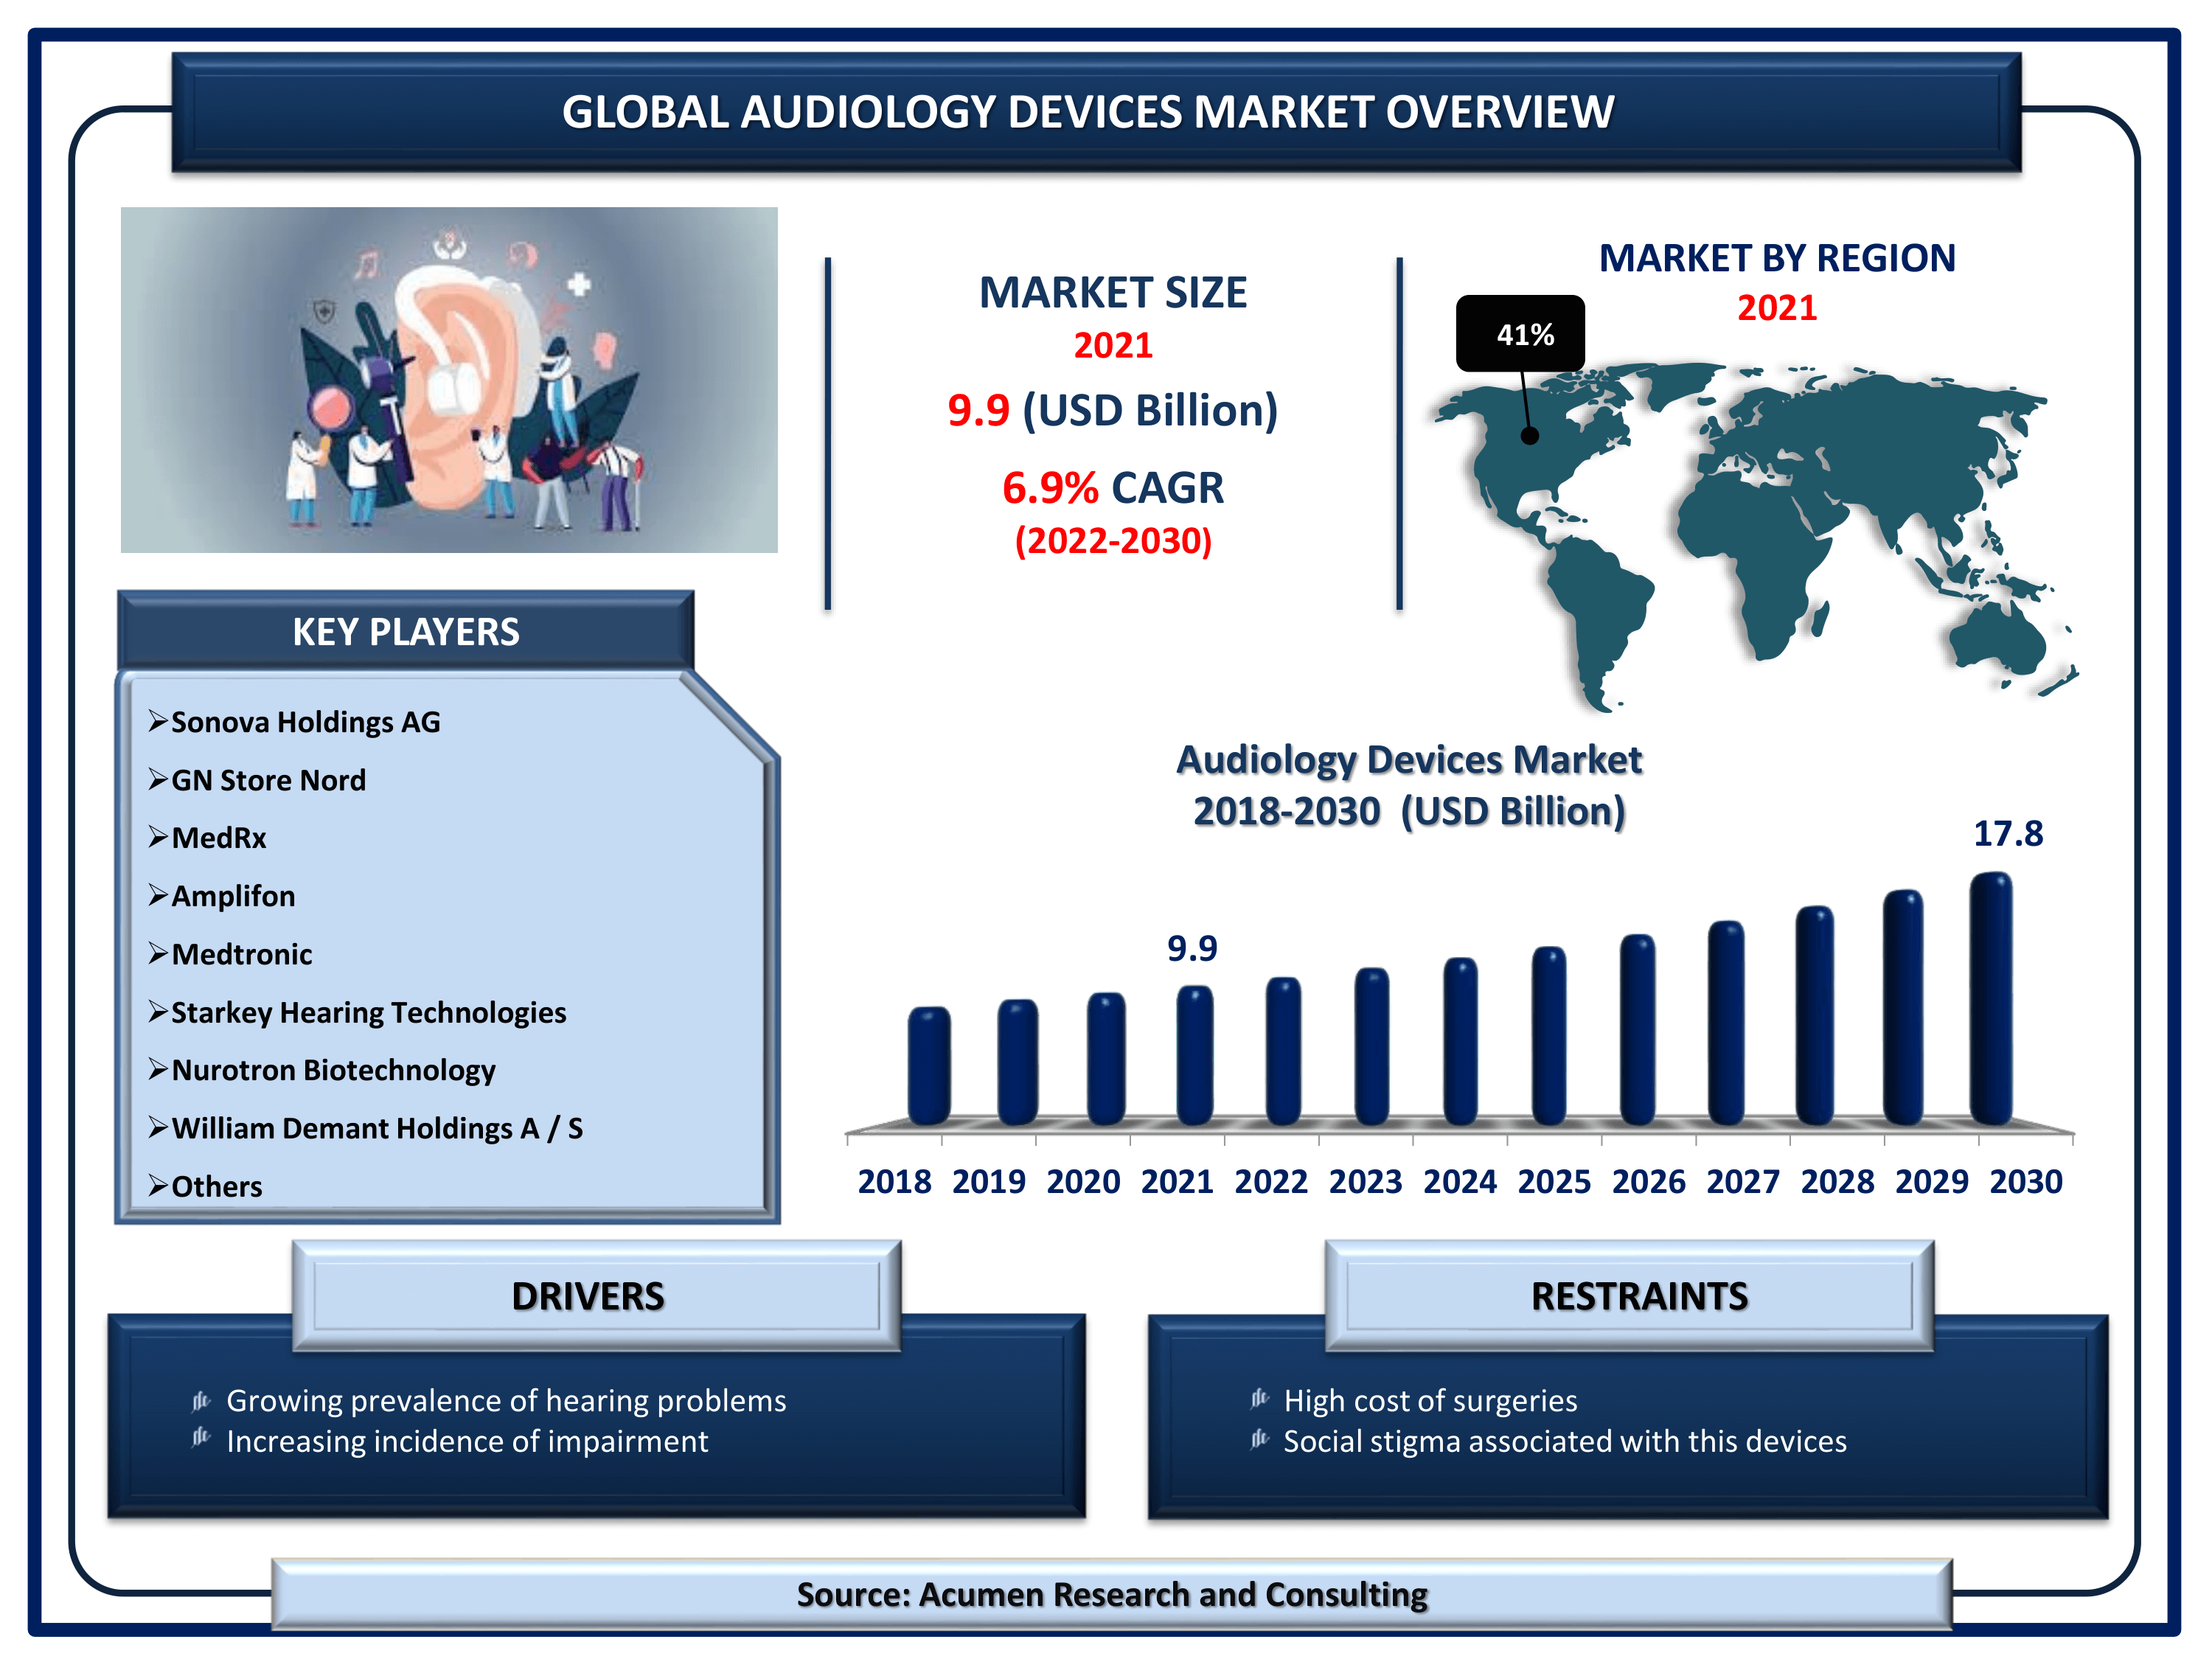 Global audiology devices market revenue is estimated to reach USD 17.8 Billion by 2030 with a CAGR of 6.9% from 2022 to 2030